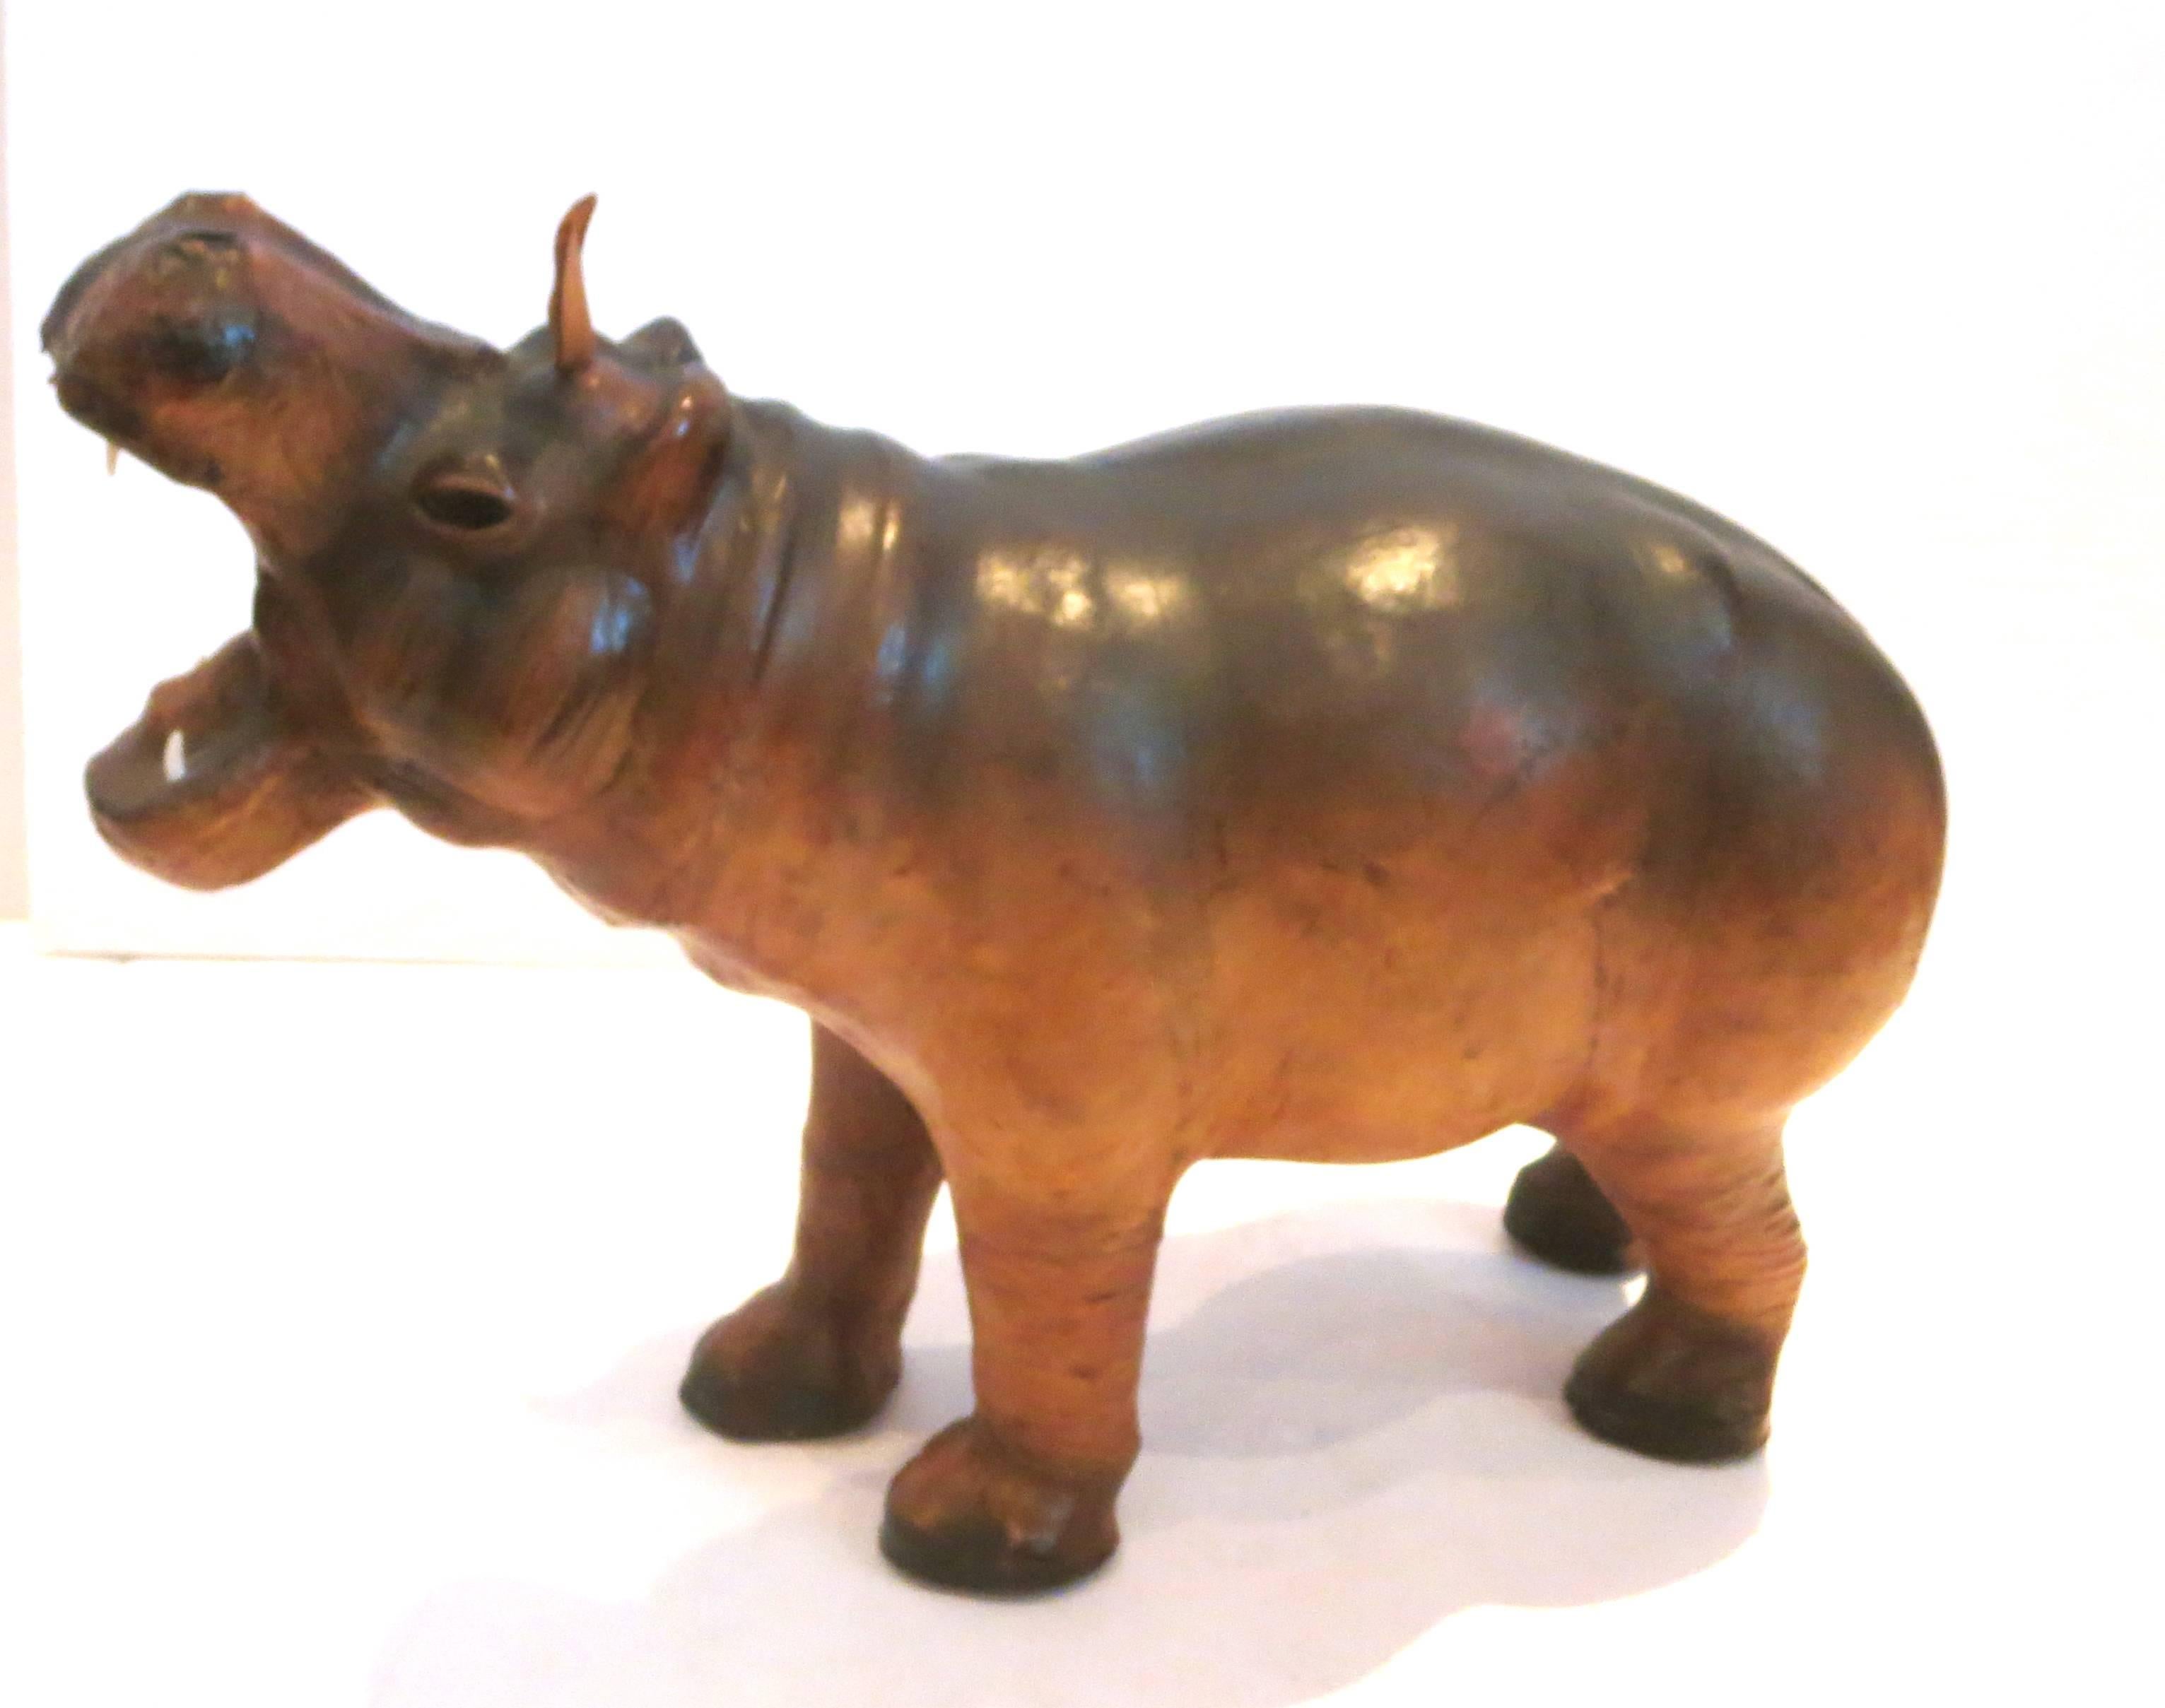 Great quality on this rare leather wrapped Hippo sculpture, circa 1970s nice detail and patina, nice original vintage condition.